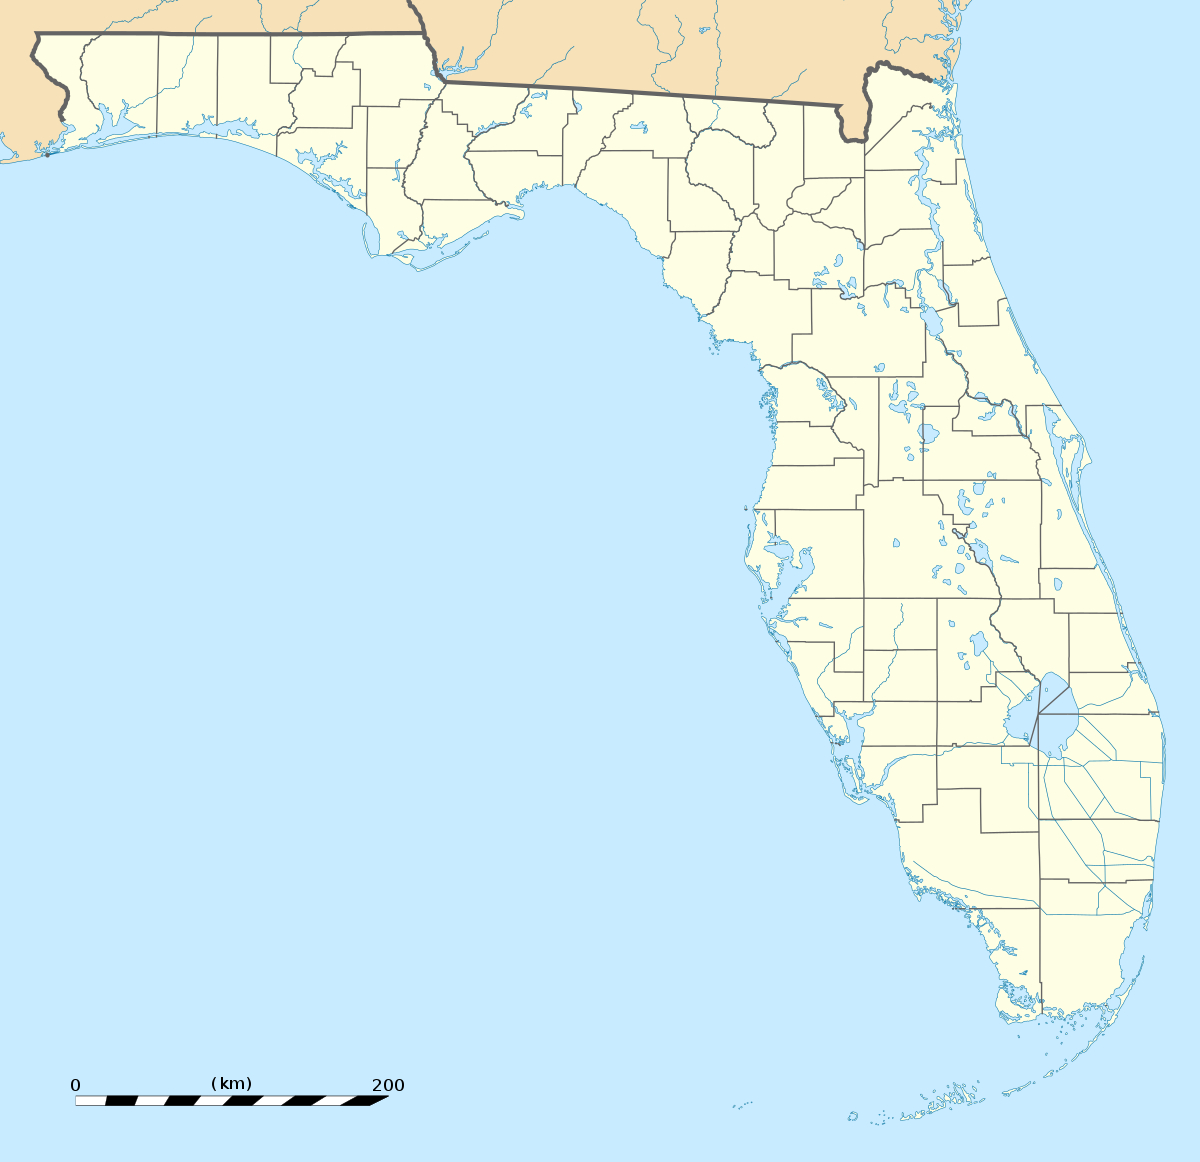 Fort Lauderdale Airport Shooting - Wikipedia - Where Is Fort Lauderdale Florida On The Map